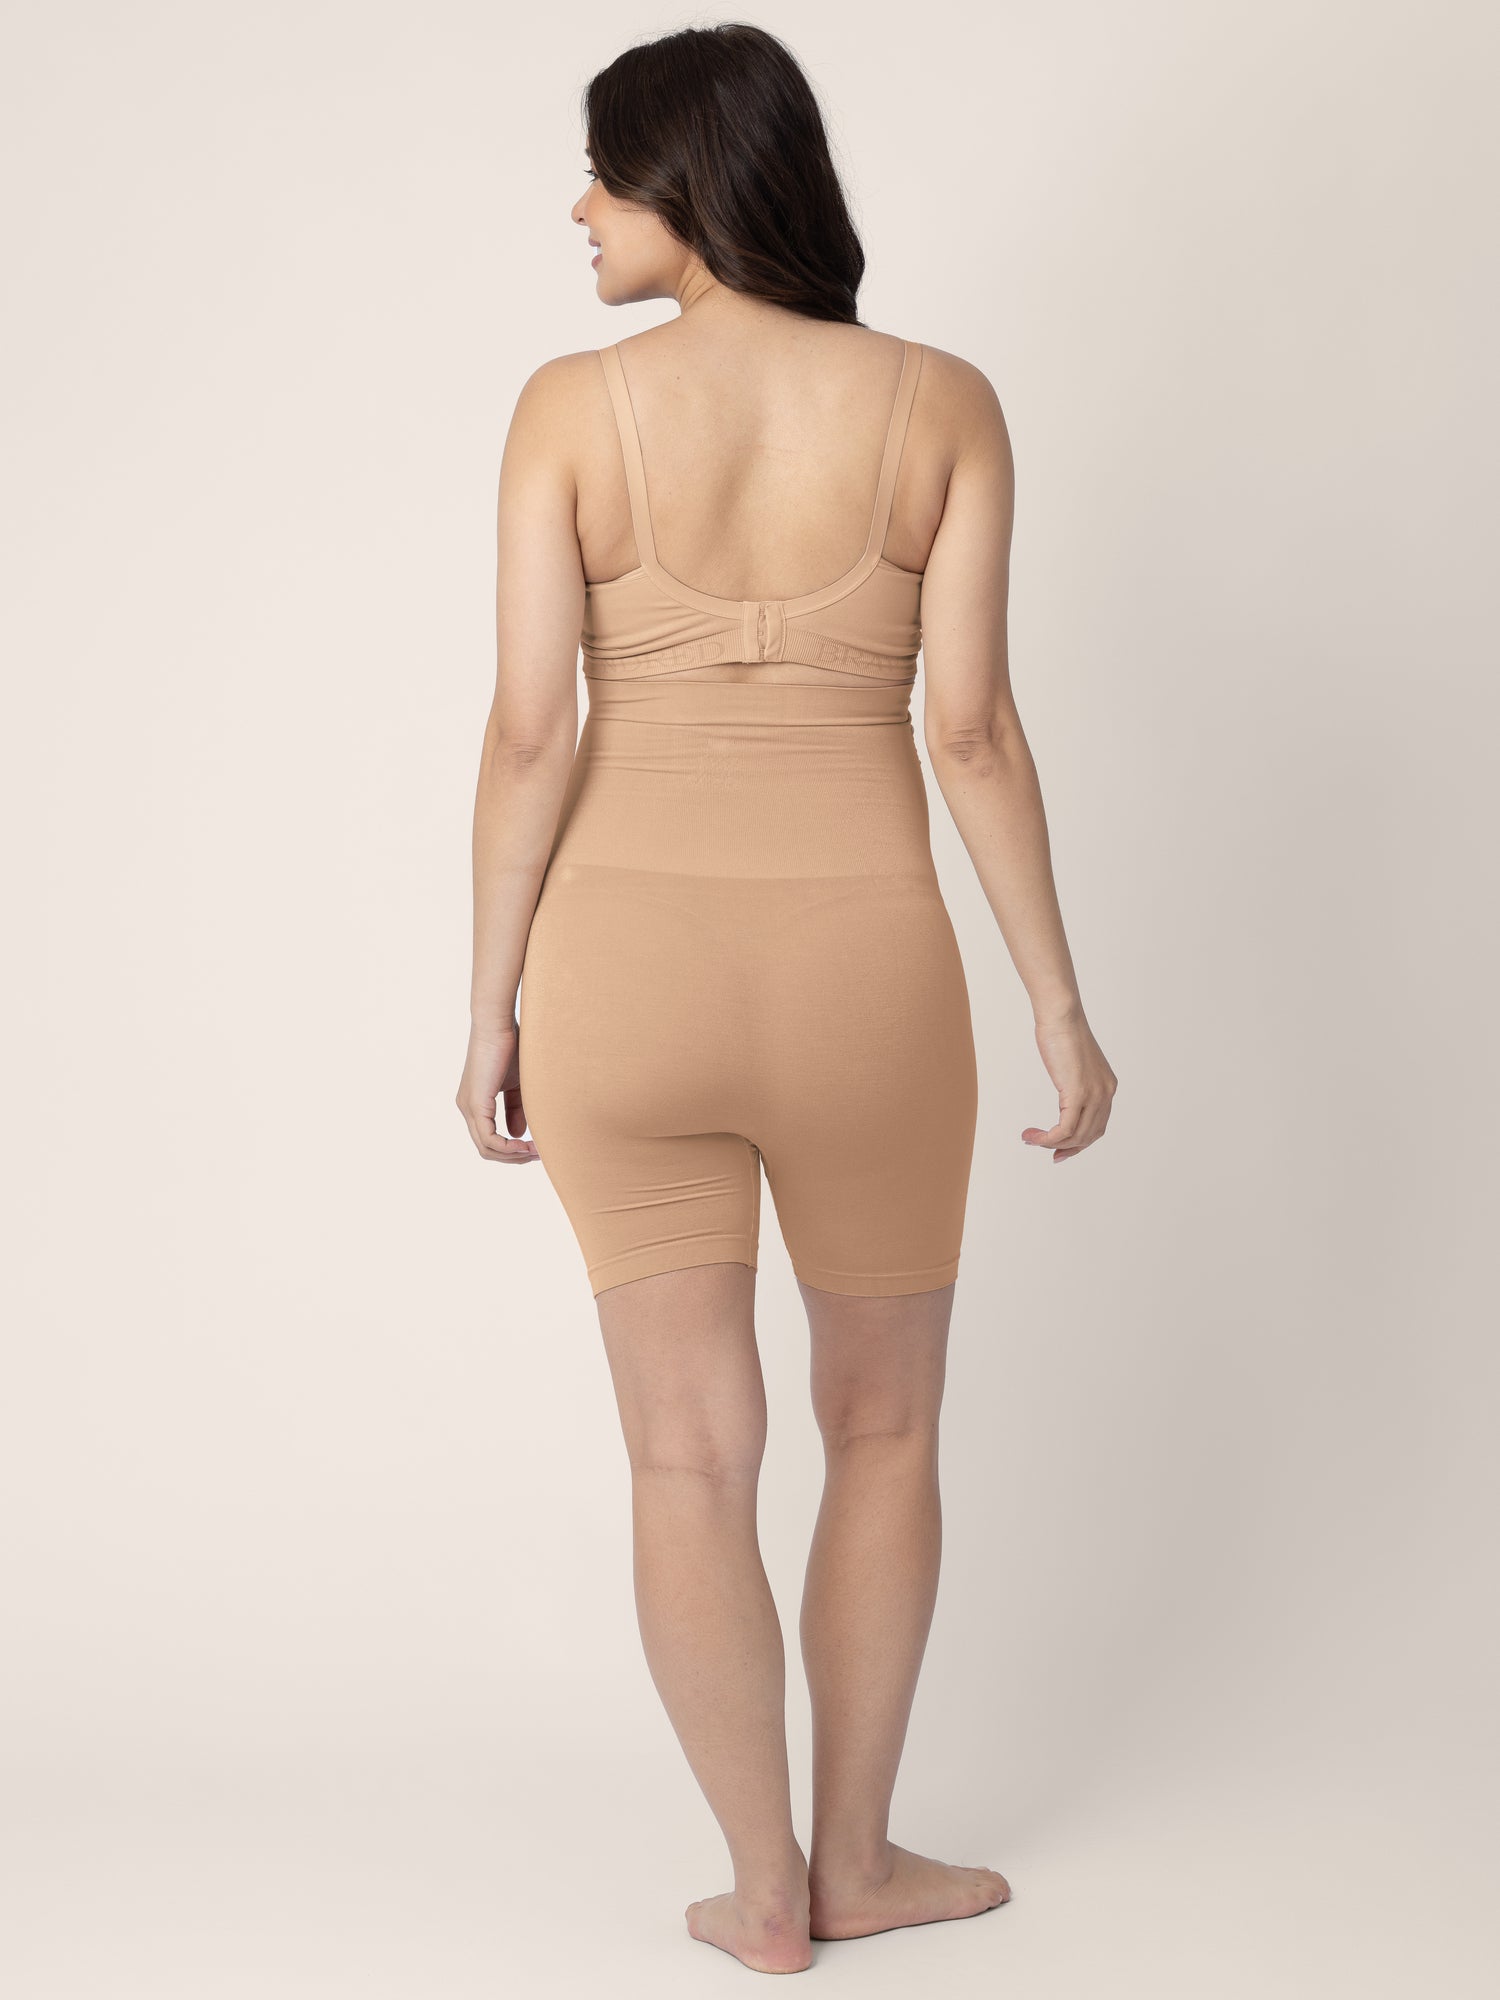 Secret Treasures Fawn Beige Maternity Seamless Pumping Bandeau - Style –  Eccentric Mall